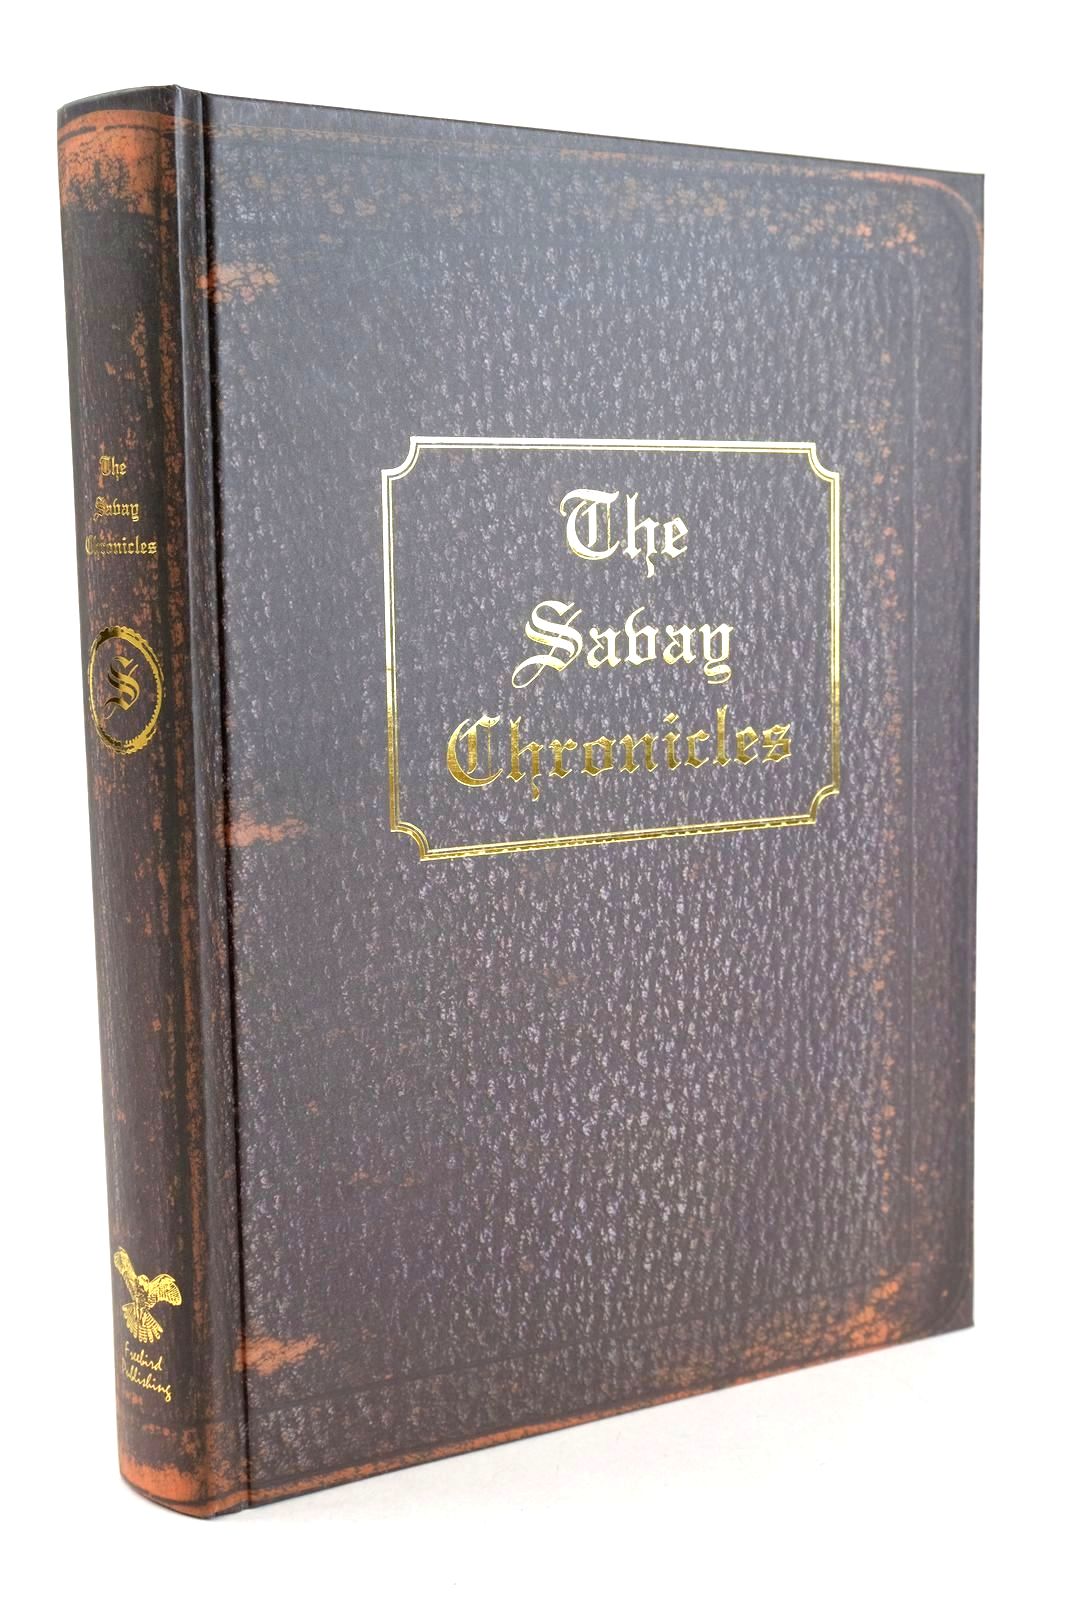 Photo of THE SAVAY CHRONICLES written by Jenkins, Keith Williams, Clive Wilson, Mike et al, illustrated by Harry, John Webber, Ian published by Freebird Publishing (STOCK CODE: 1327663)  for sale by Stella & Rose's Books